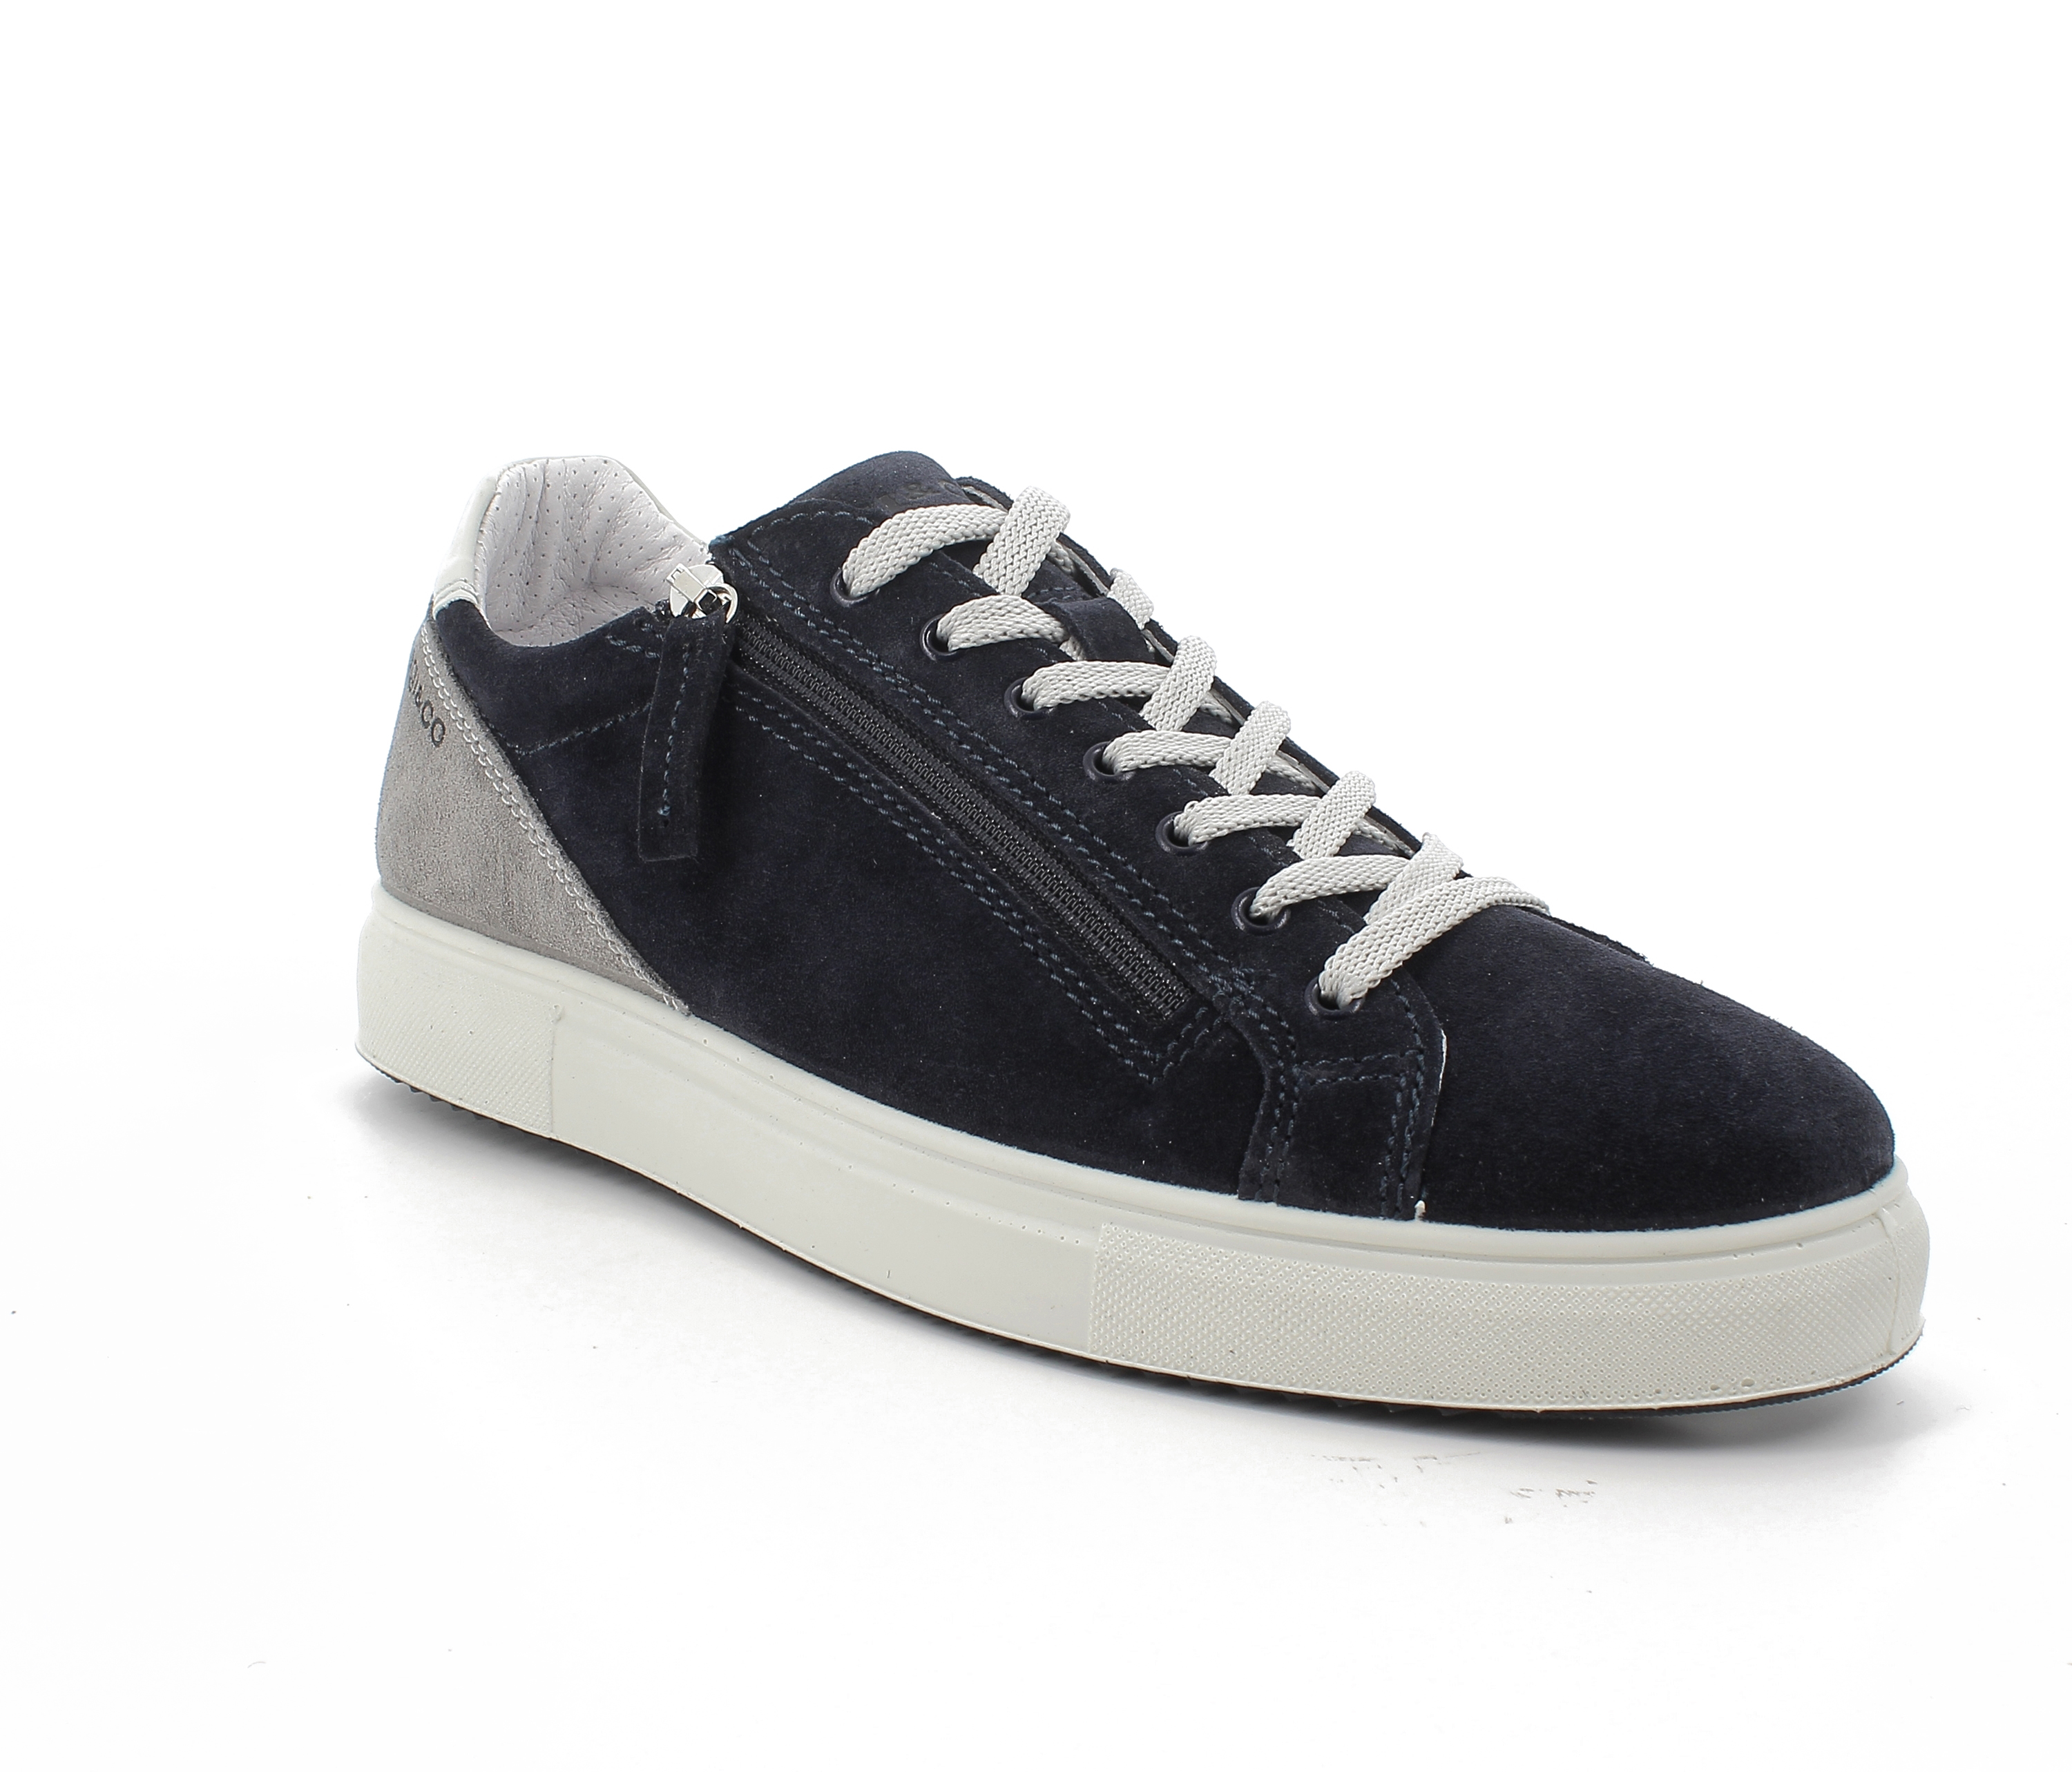 Ush 71281 - Blue suede leather